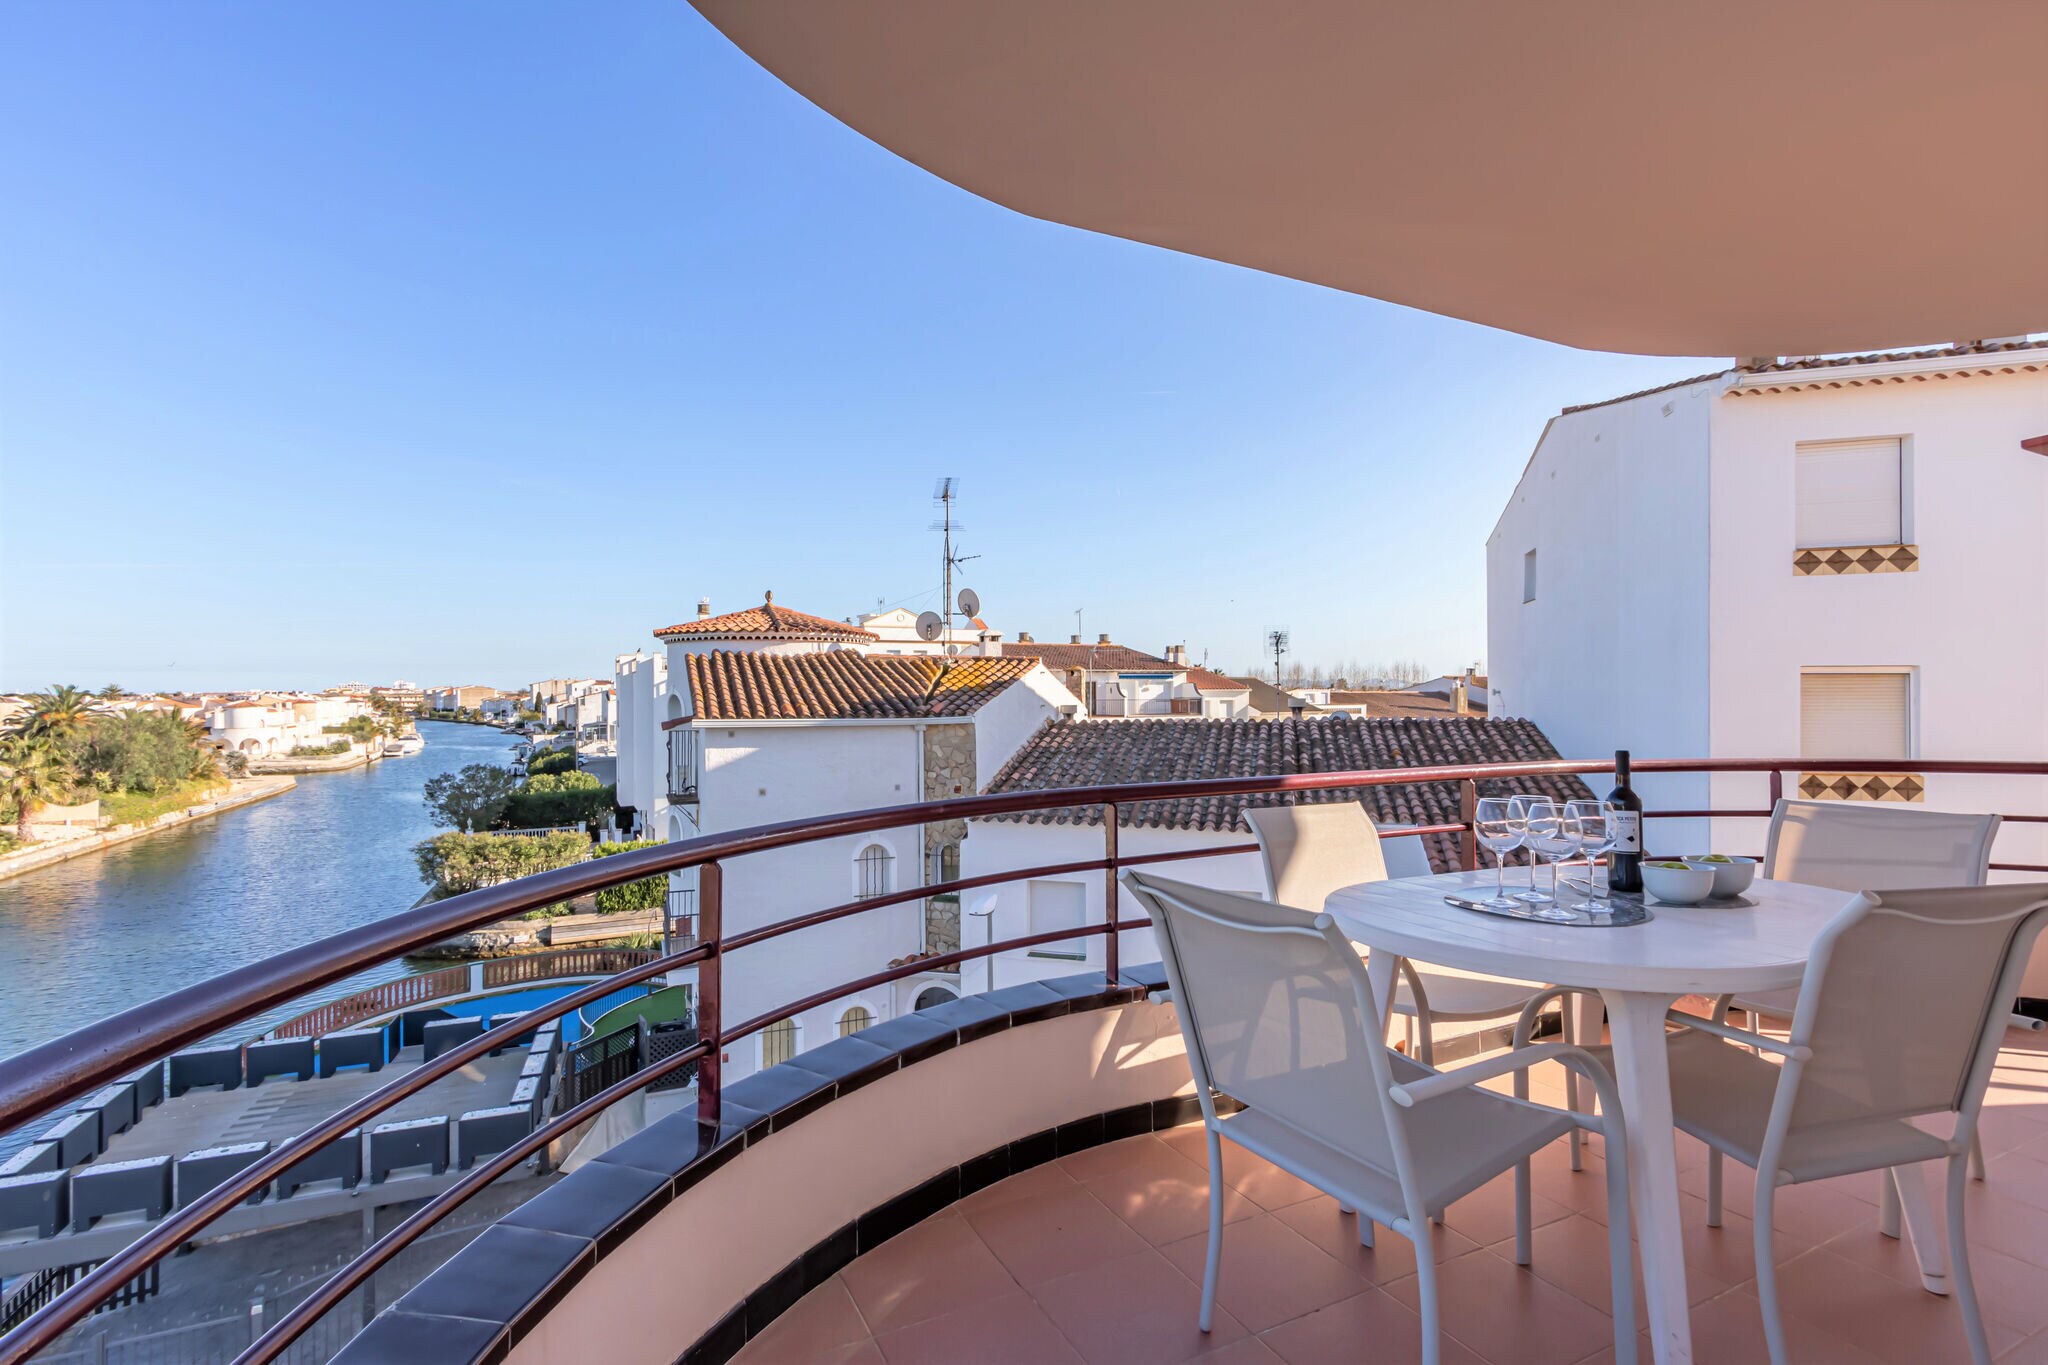 Waterfront Apartment with large terrace and parking space